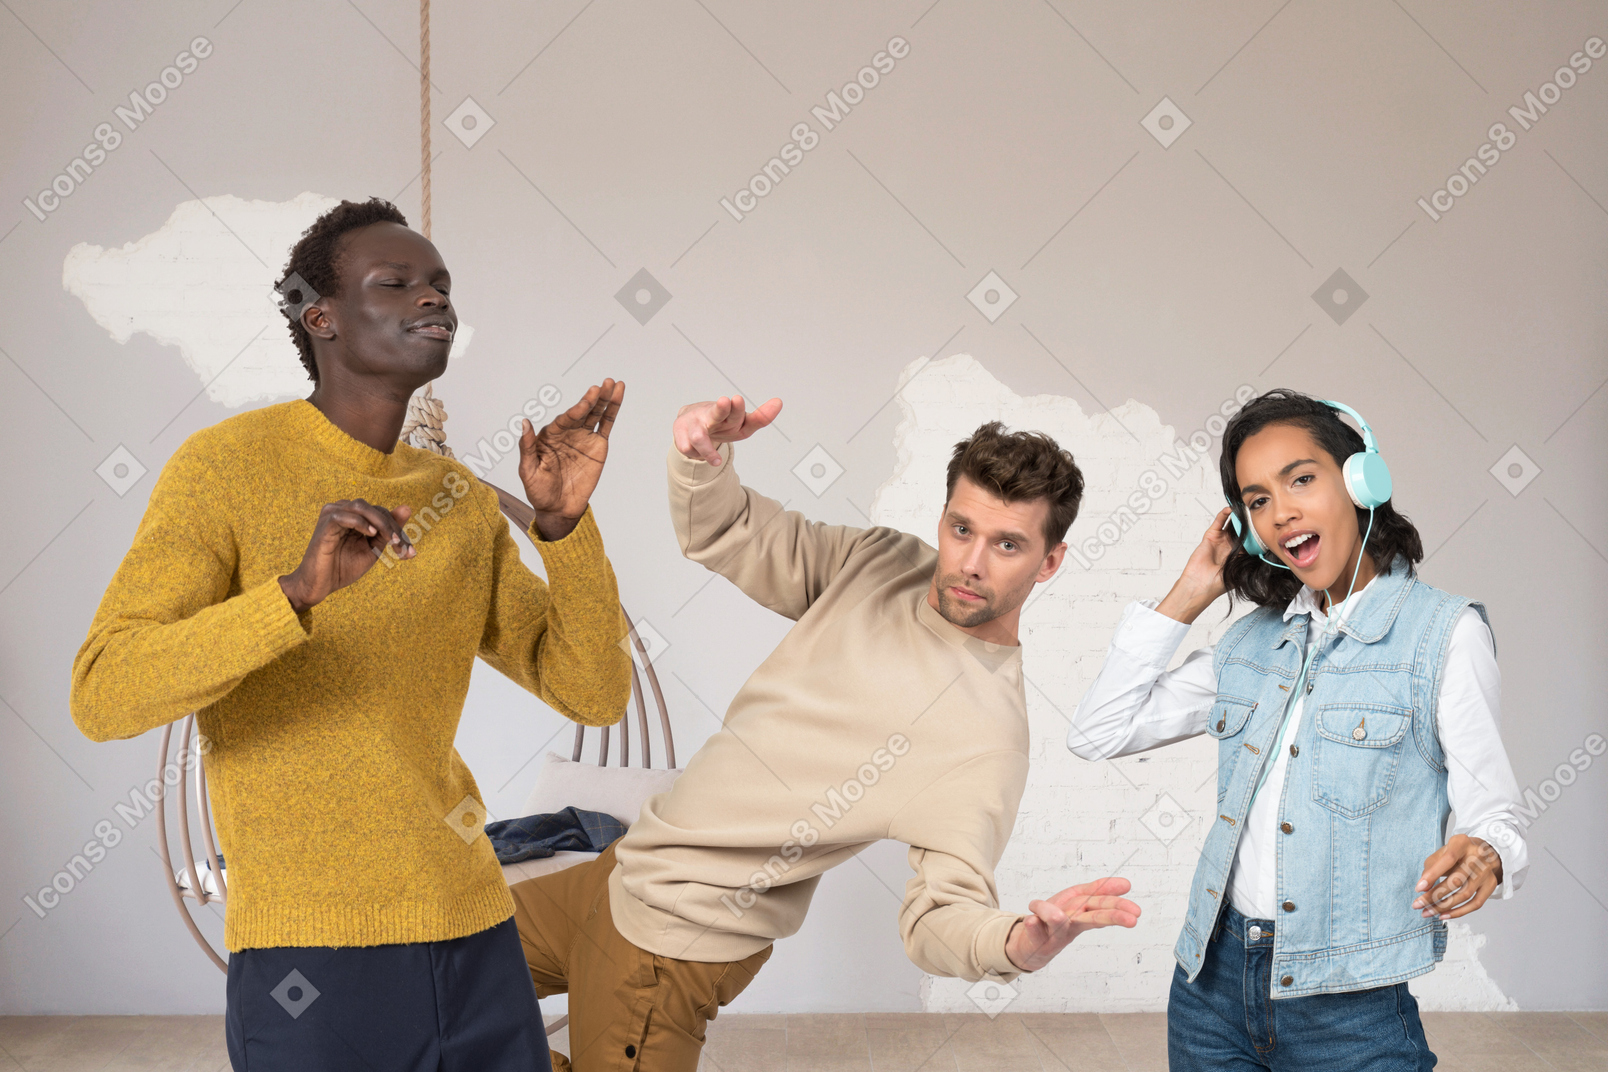 A group of young multicultural friends dancing to the music together in the bright minimalistically styled room